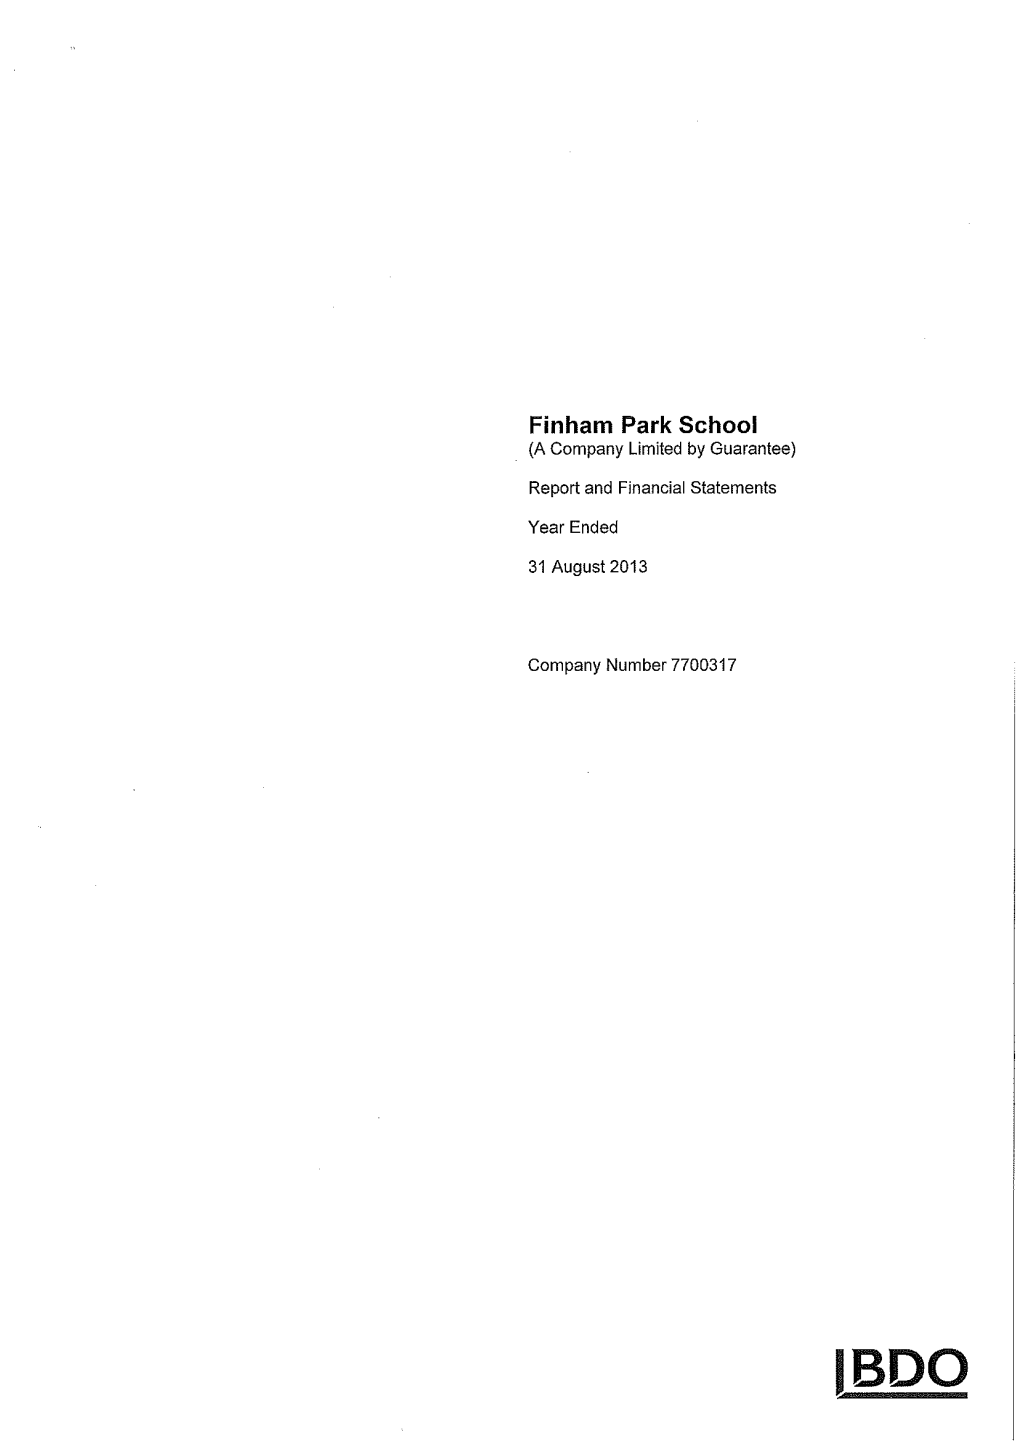 Inham Park School (A Company Limited by Guarantee)